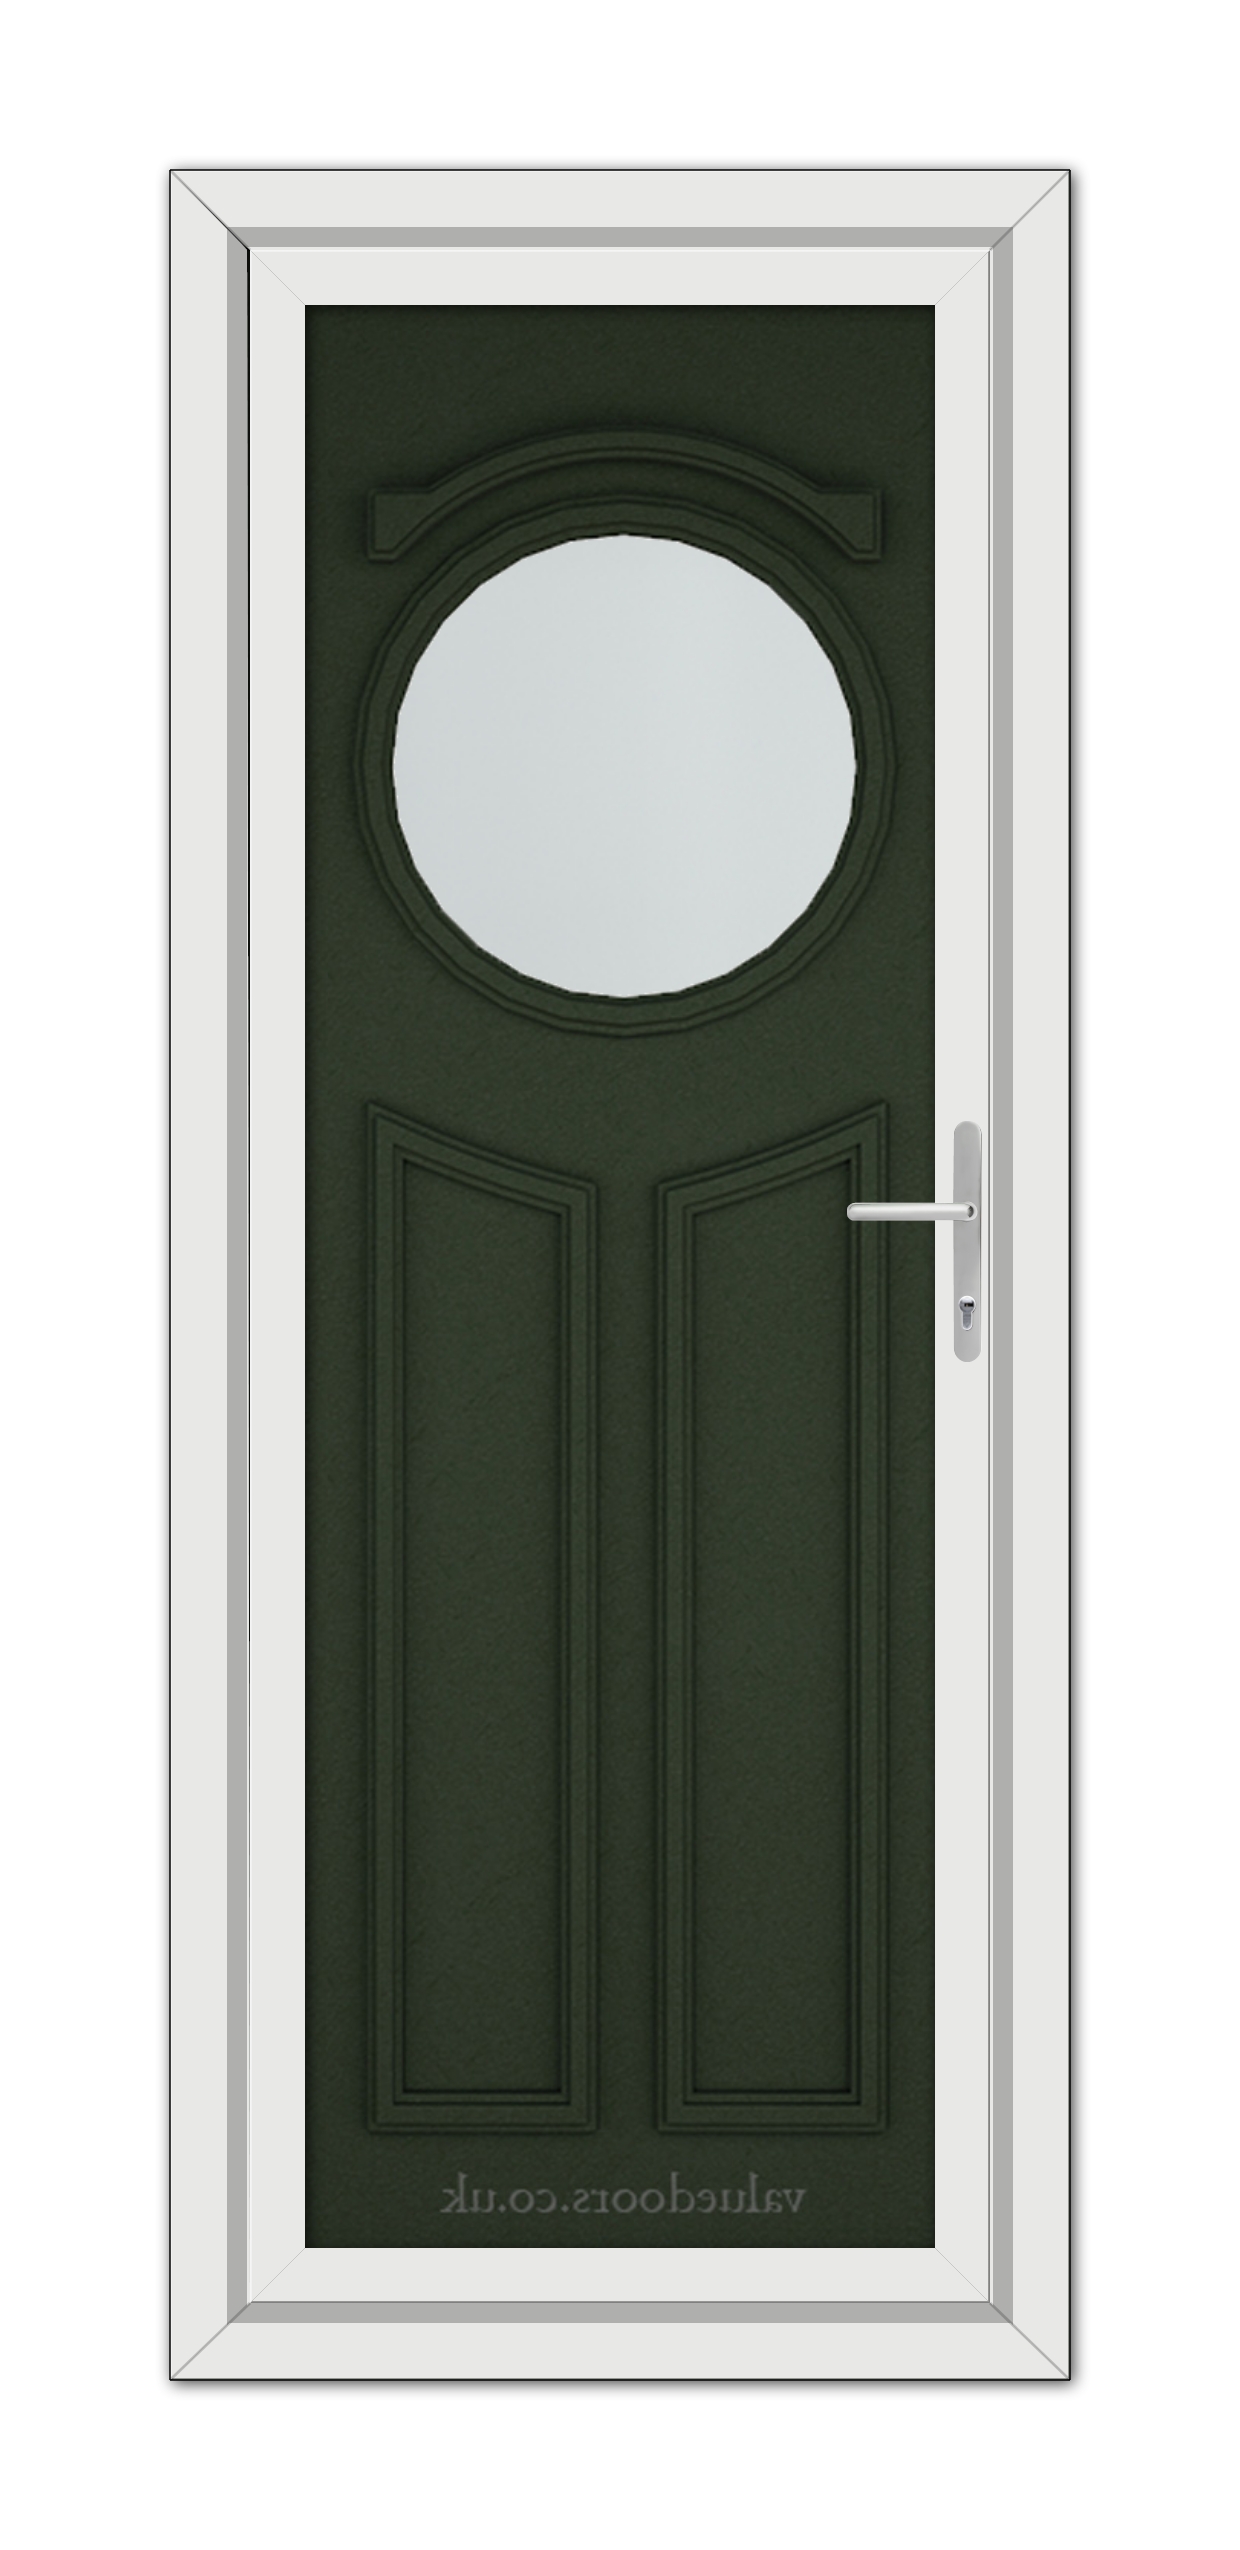 A Green Blenheim uPVC Door with an oval window at the top and a white frame, featuring a modern handle on the right side.